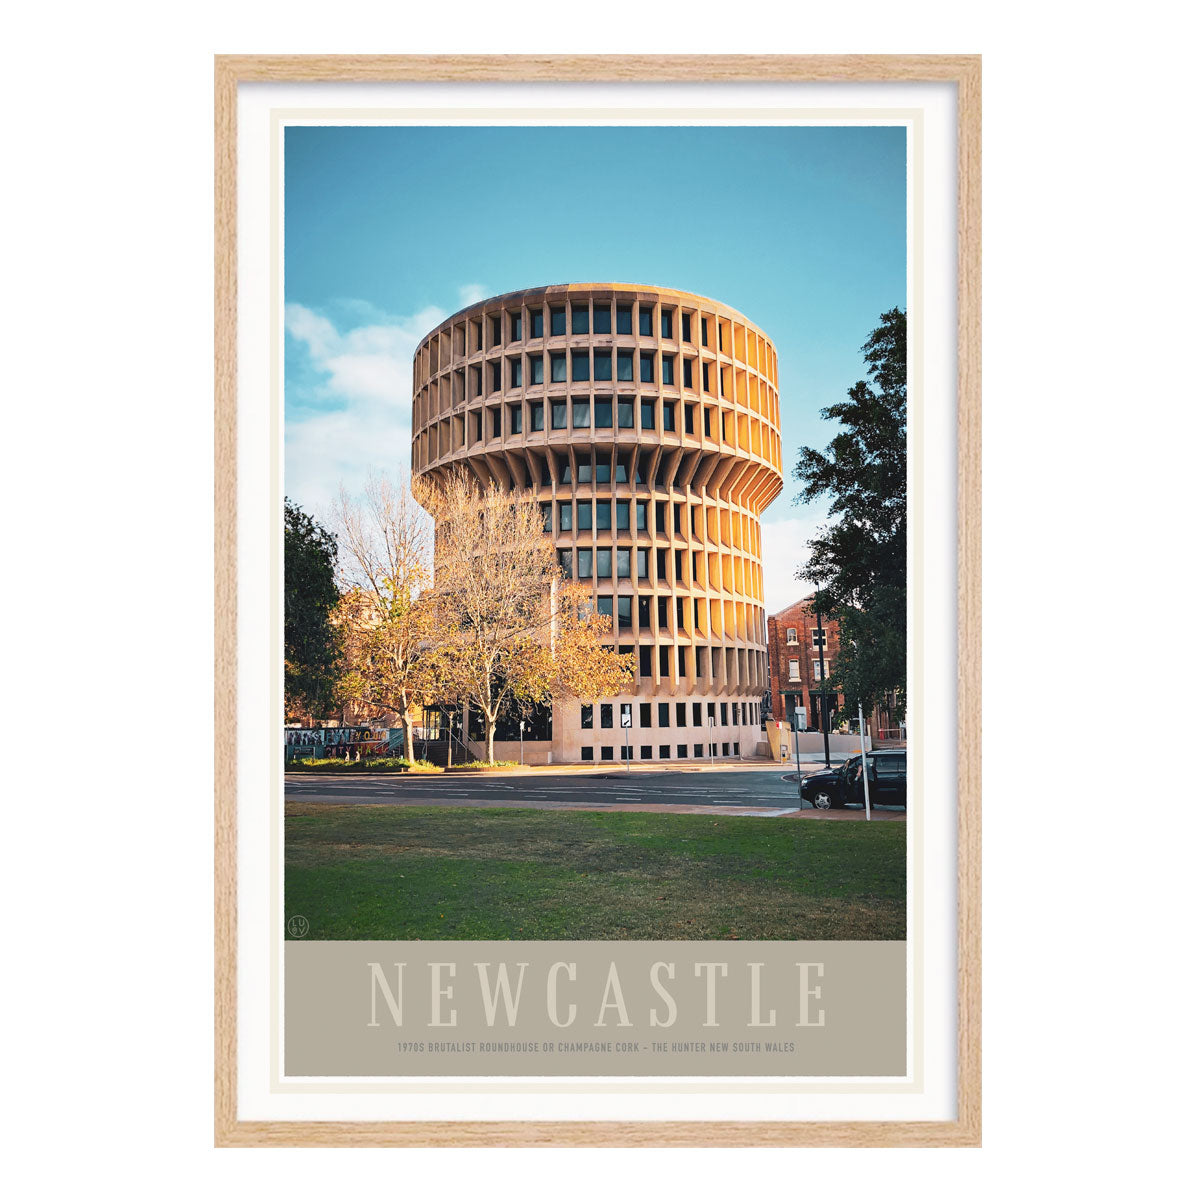 Newcastle NSW vintage retro travel poster print in oak frame from Places We Luv